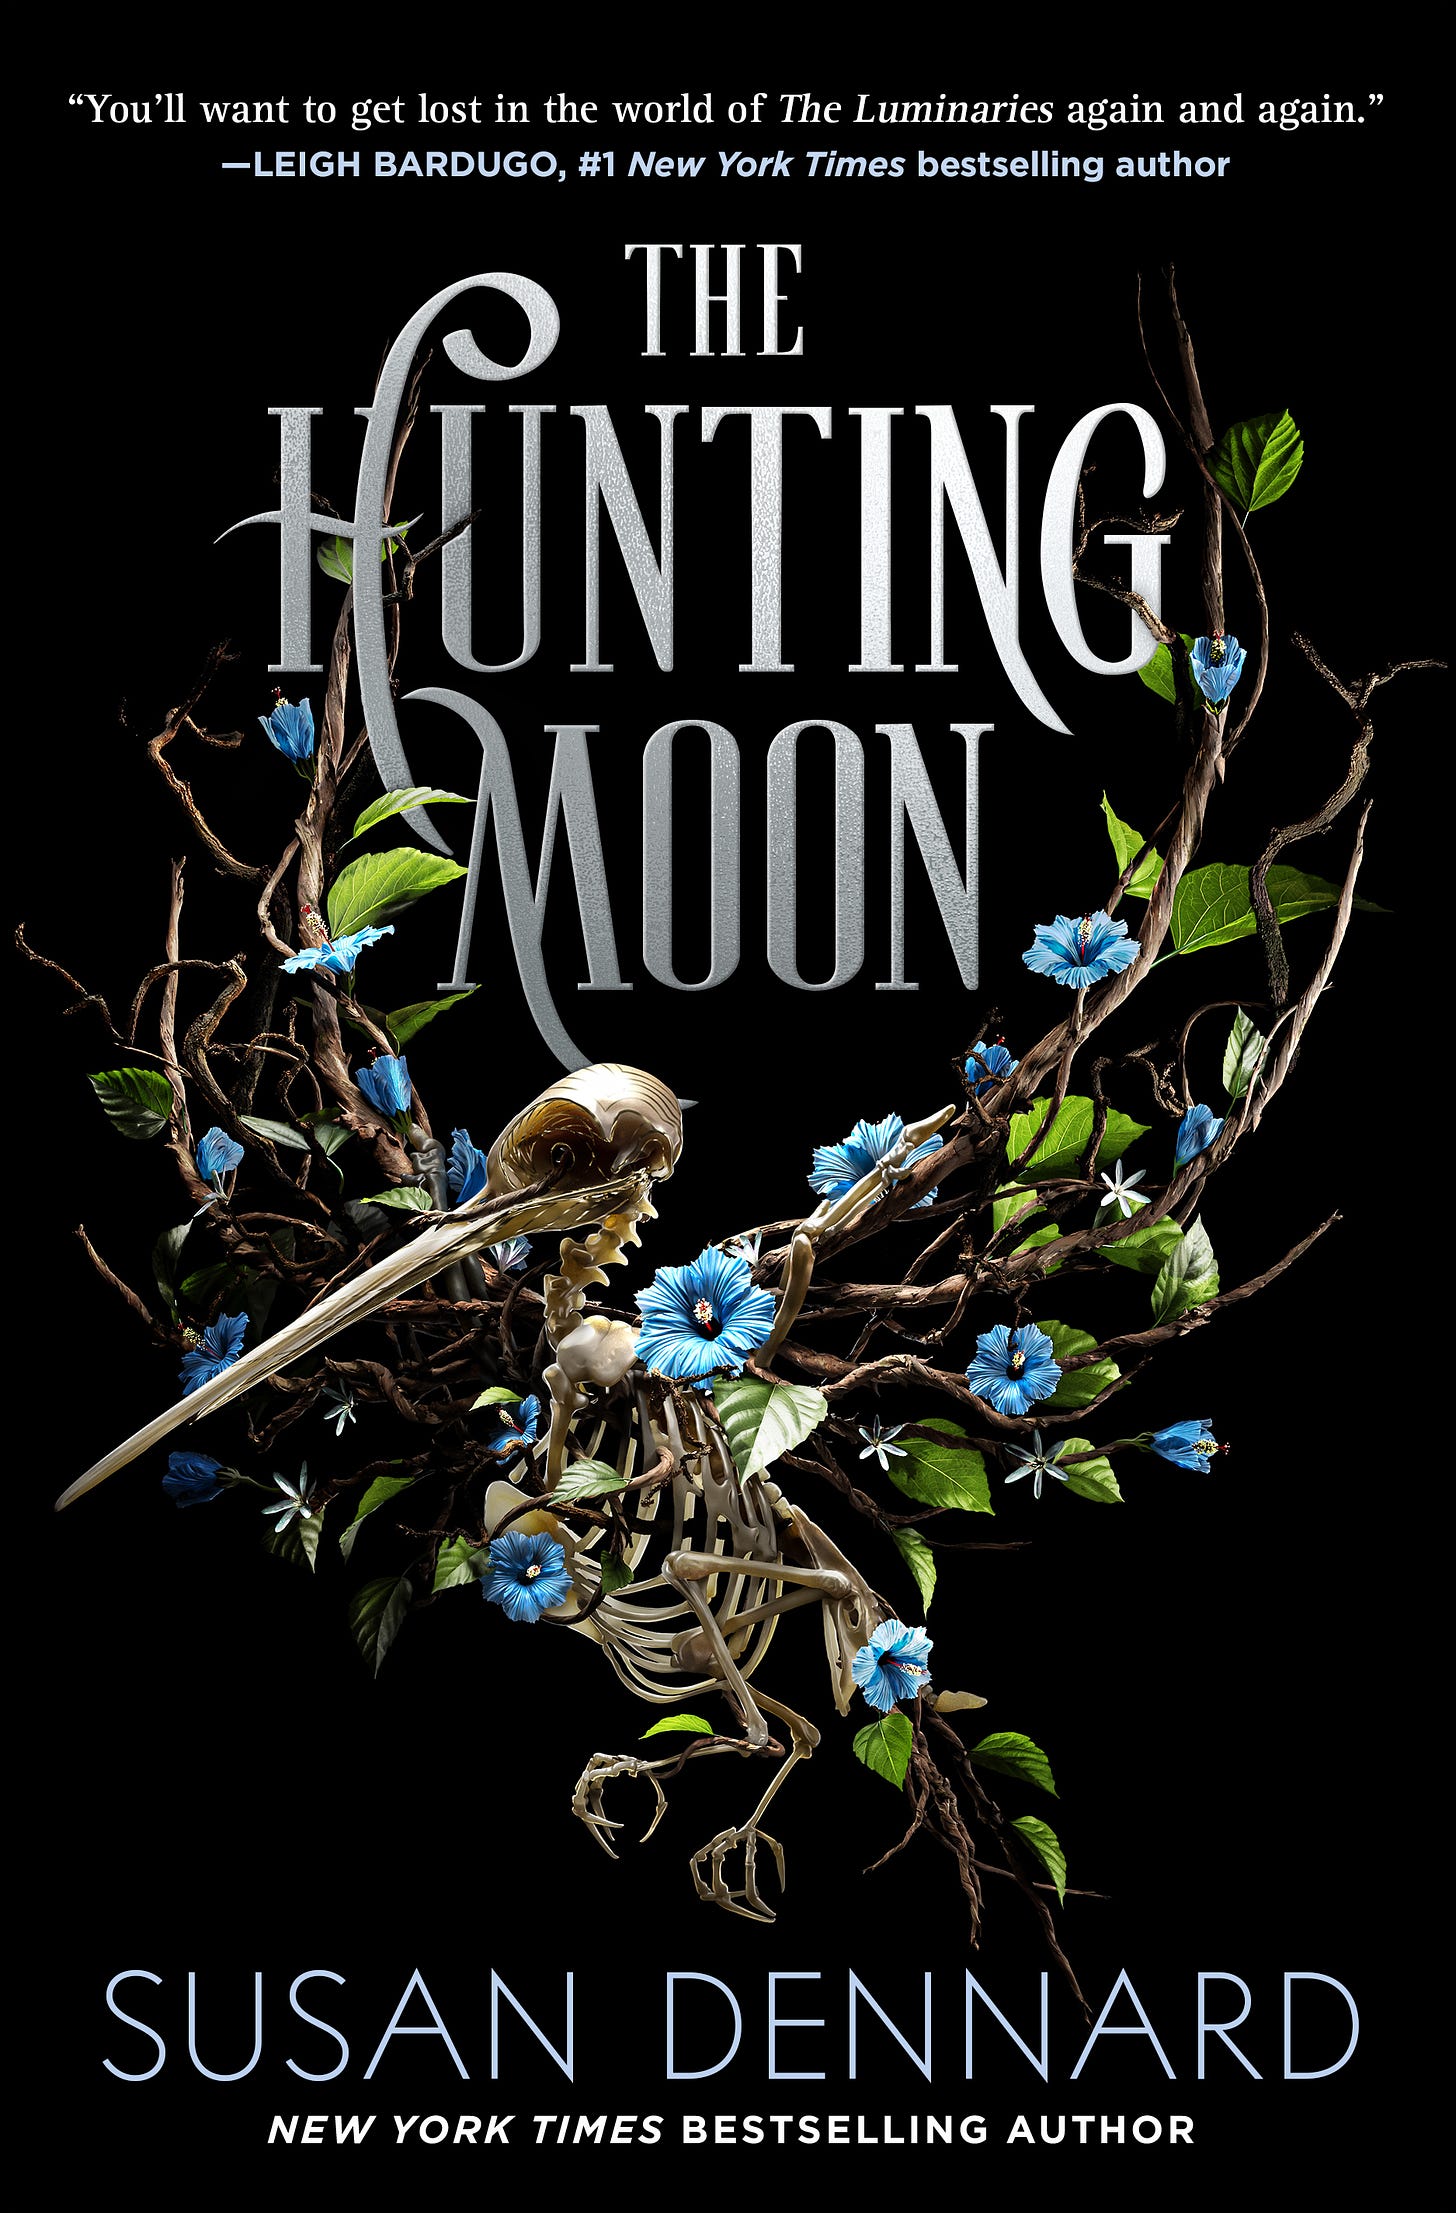 Cover of the Hunting Moon with a hummingbird skeleton and blue flowers